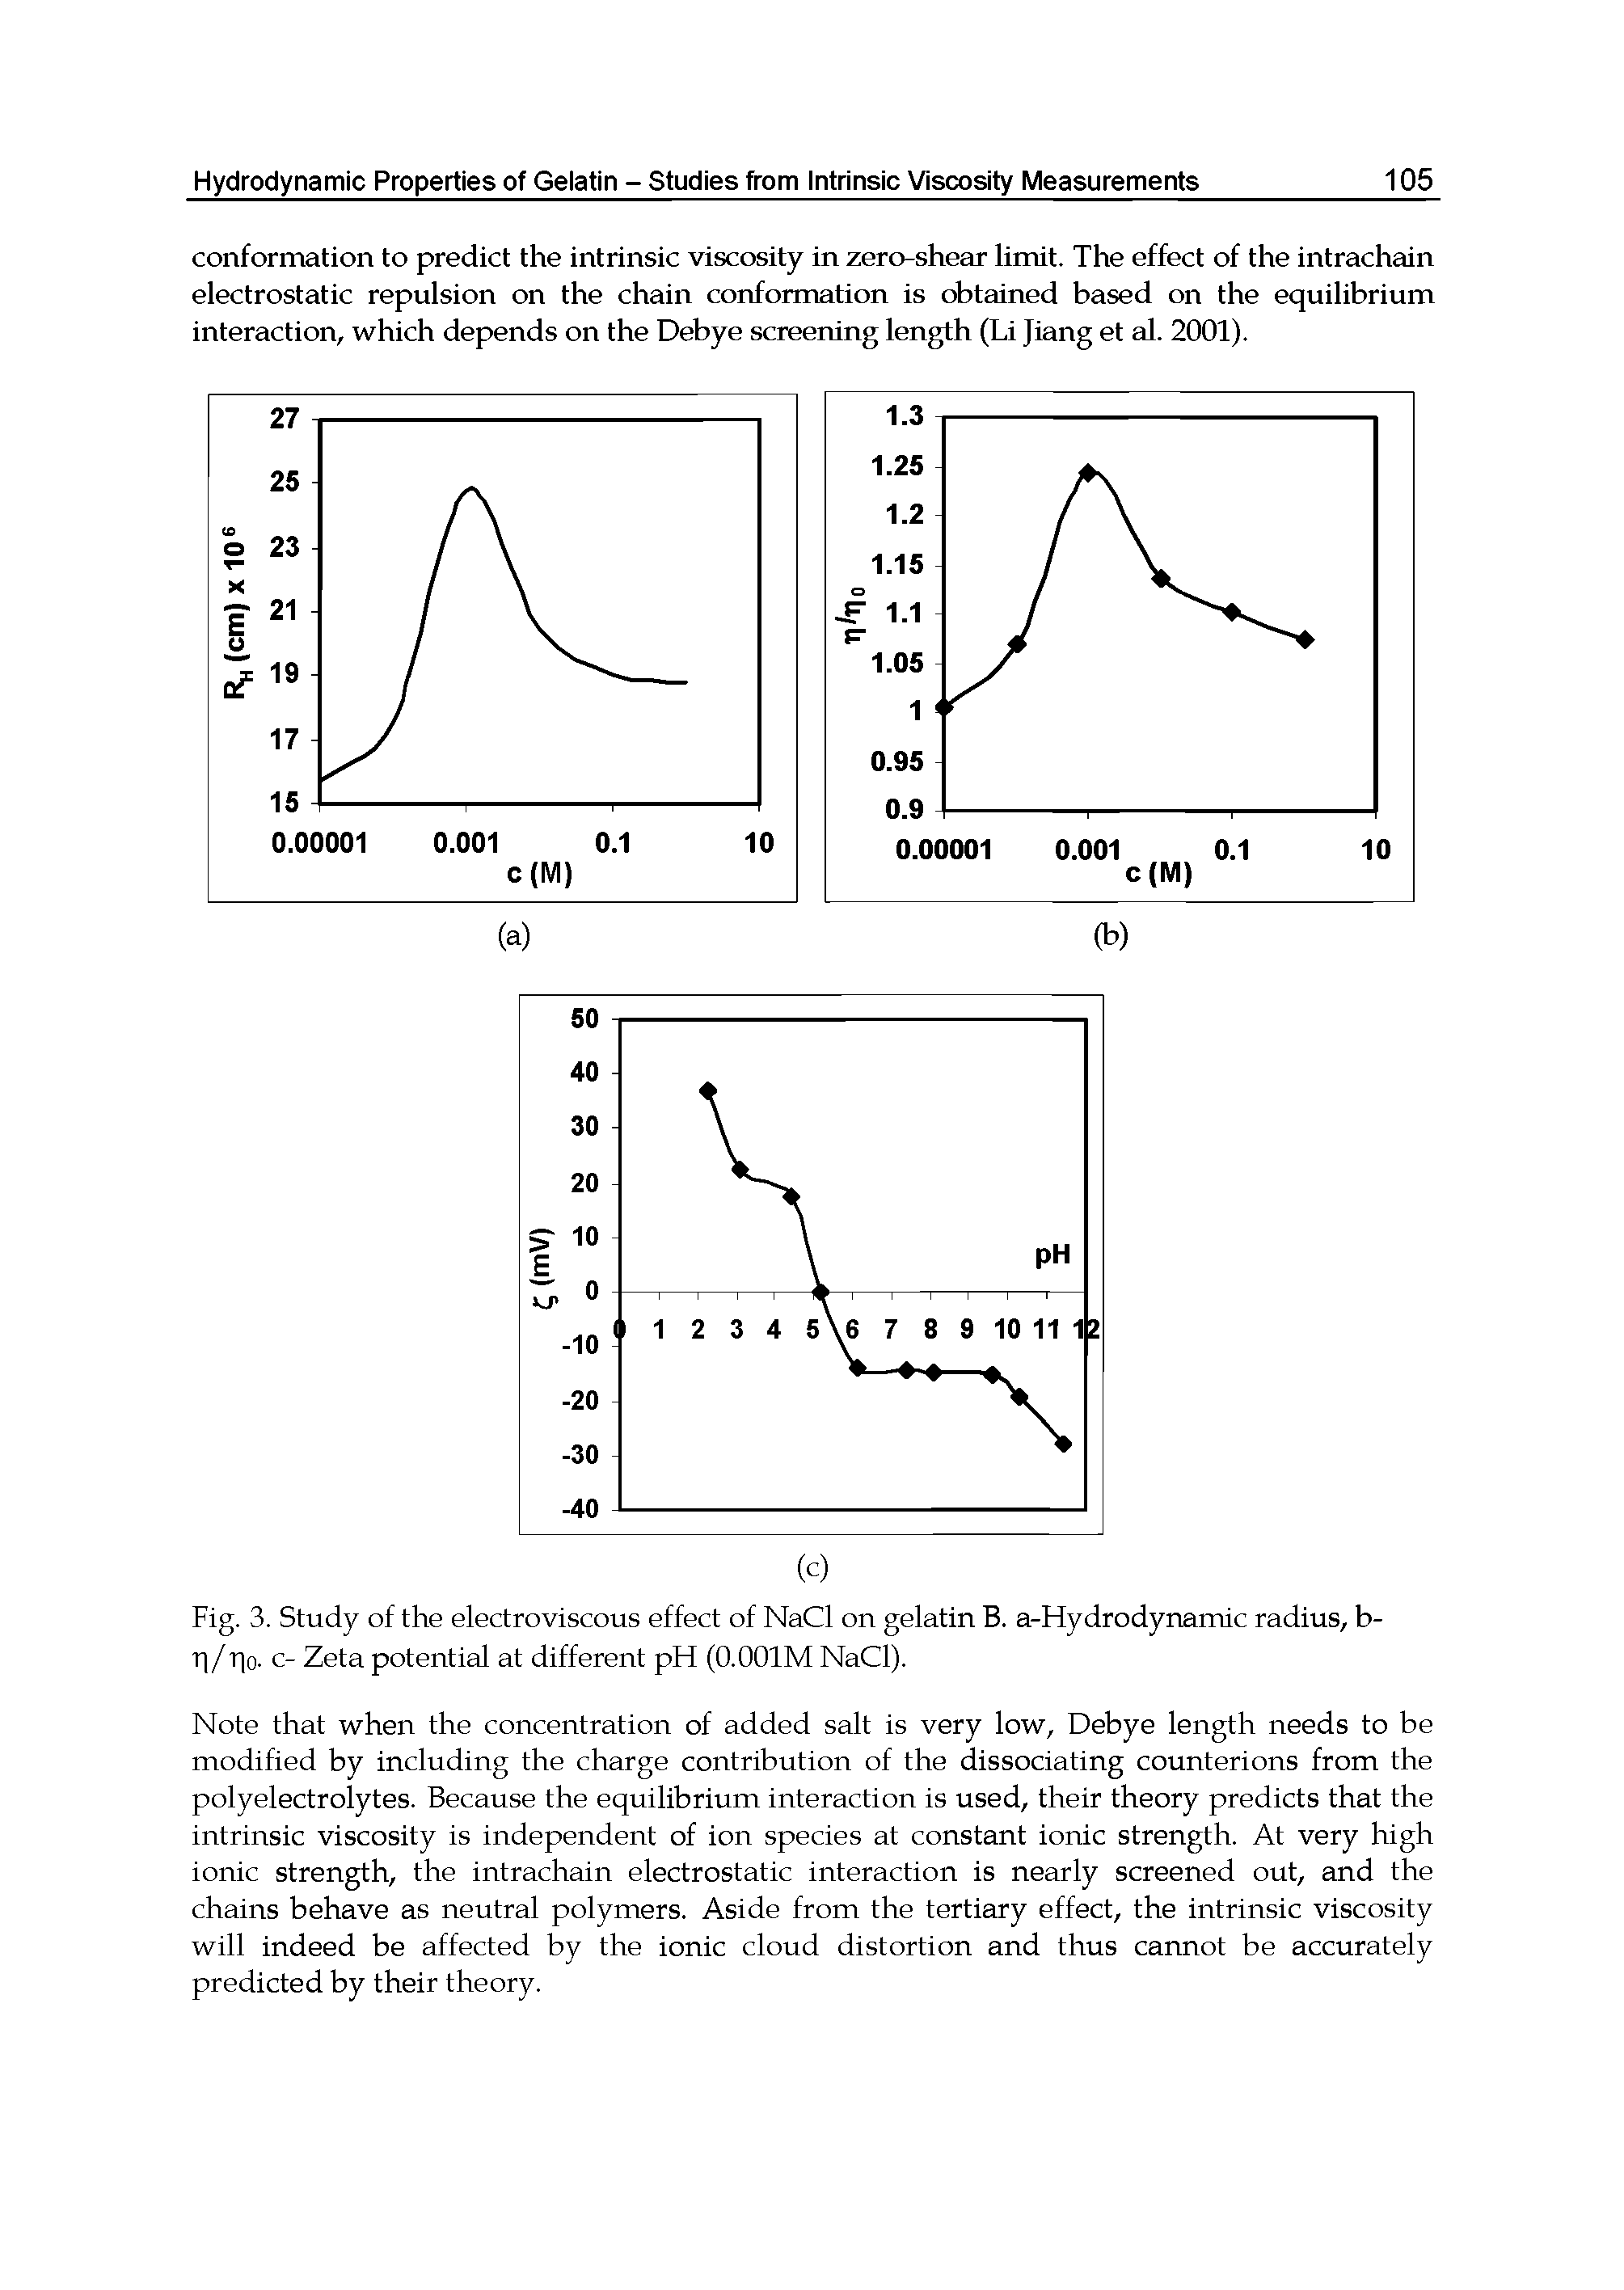 Fig. 3. Study of the electroviscous effect of NaCl on gelatin B. a-Hydrodynamic radius, b-r /r o. c- Zeta potential at different pH (O.OOIM NaCl).